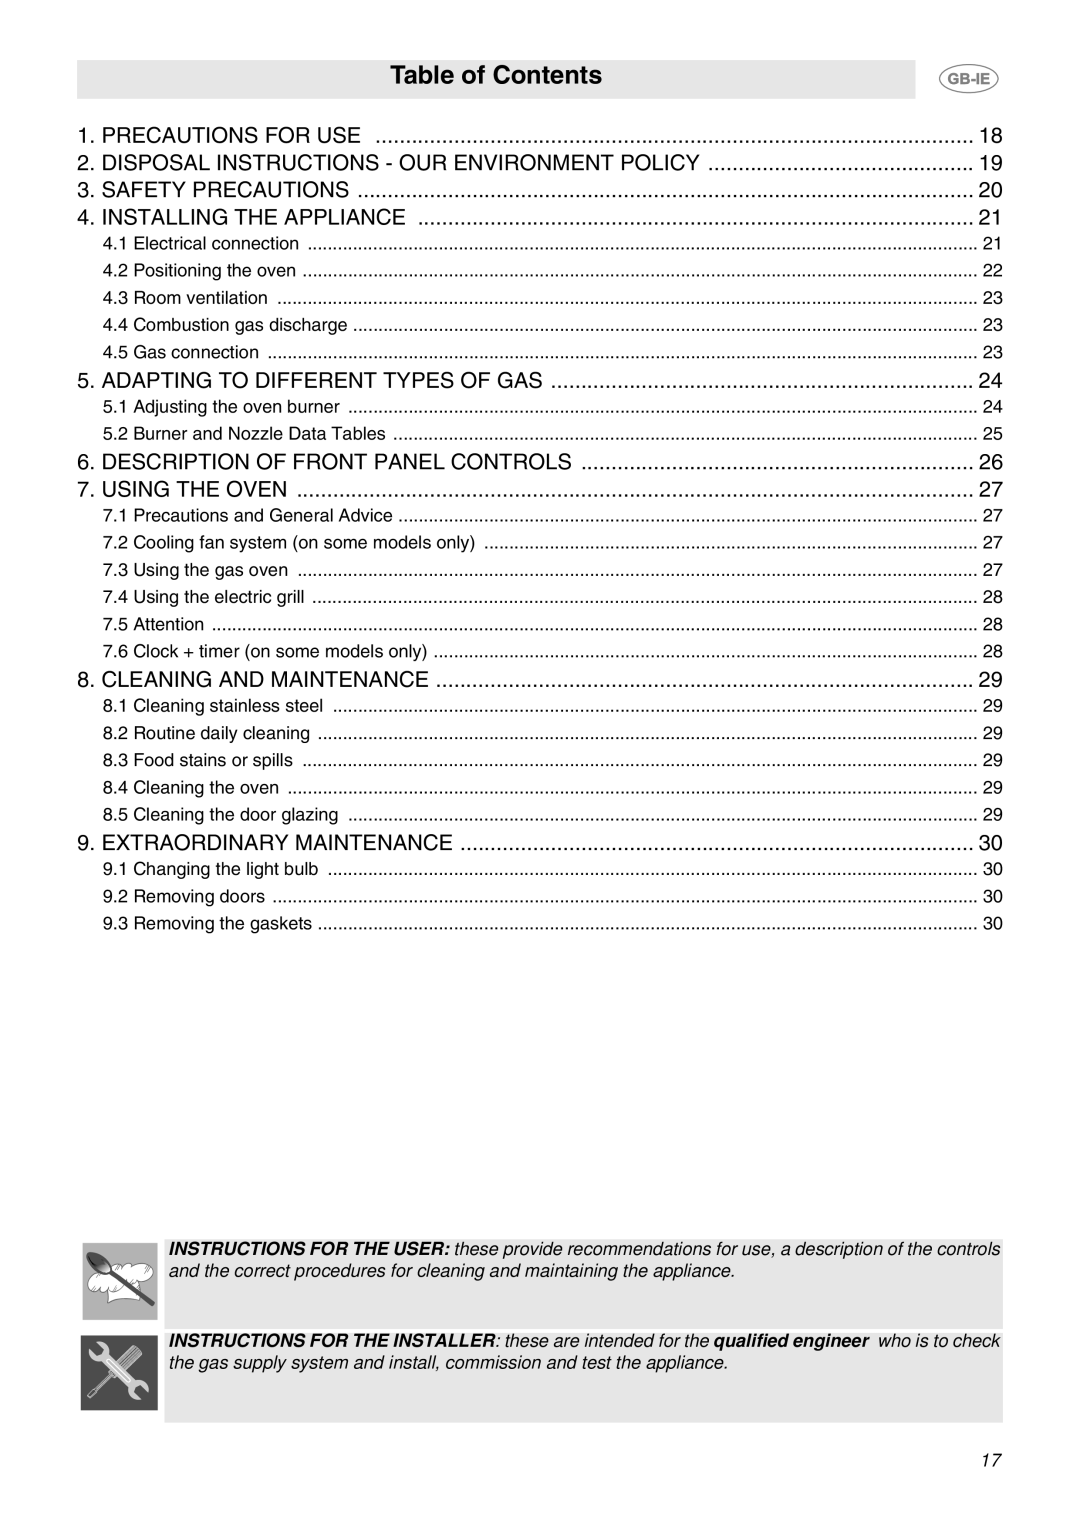 Smeg S340G manual Table of Contents, Precautions For Use, Disposal Instructions - Our Environment Policy, Using The Oven 